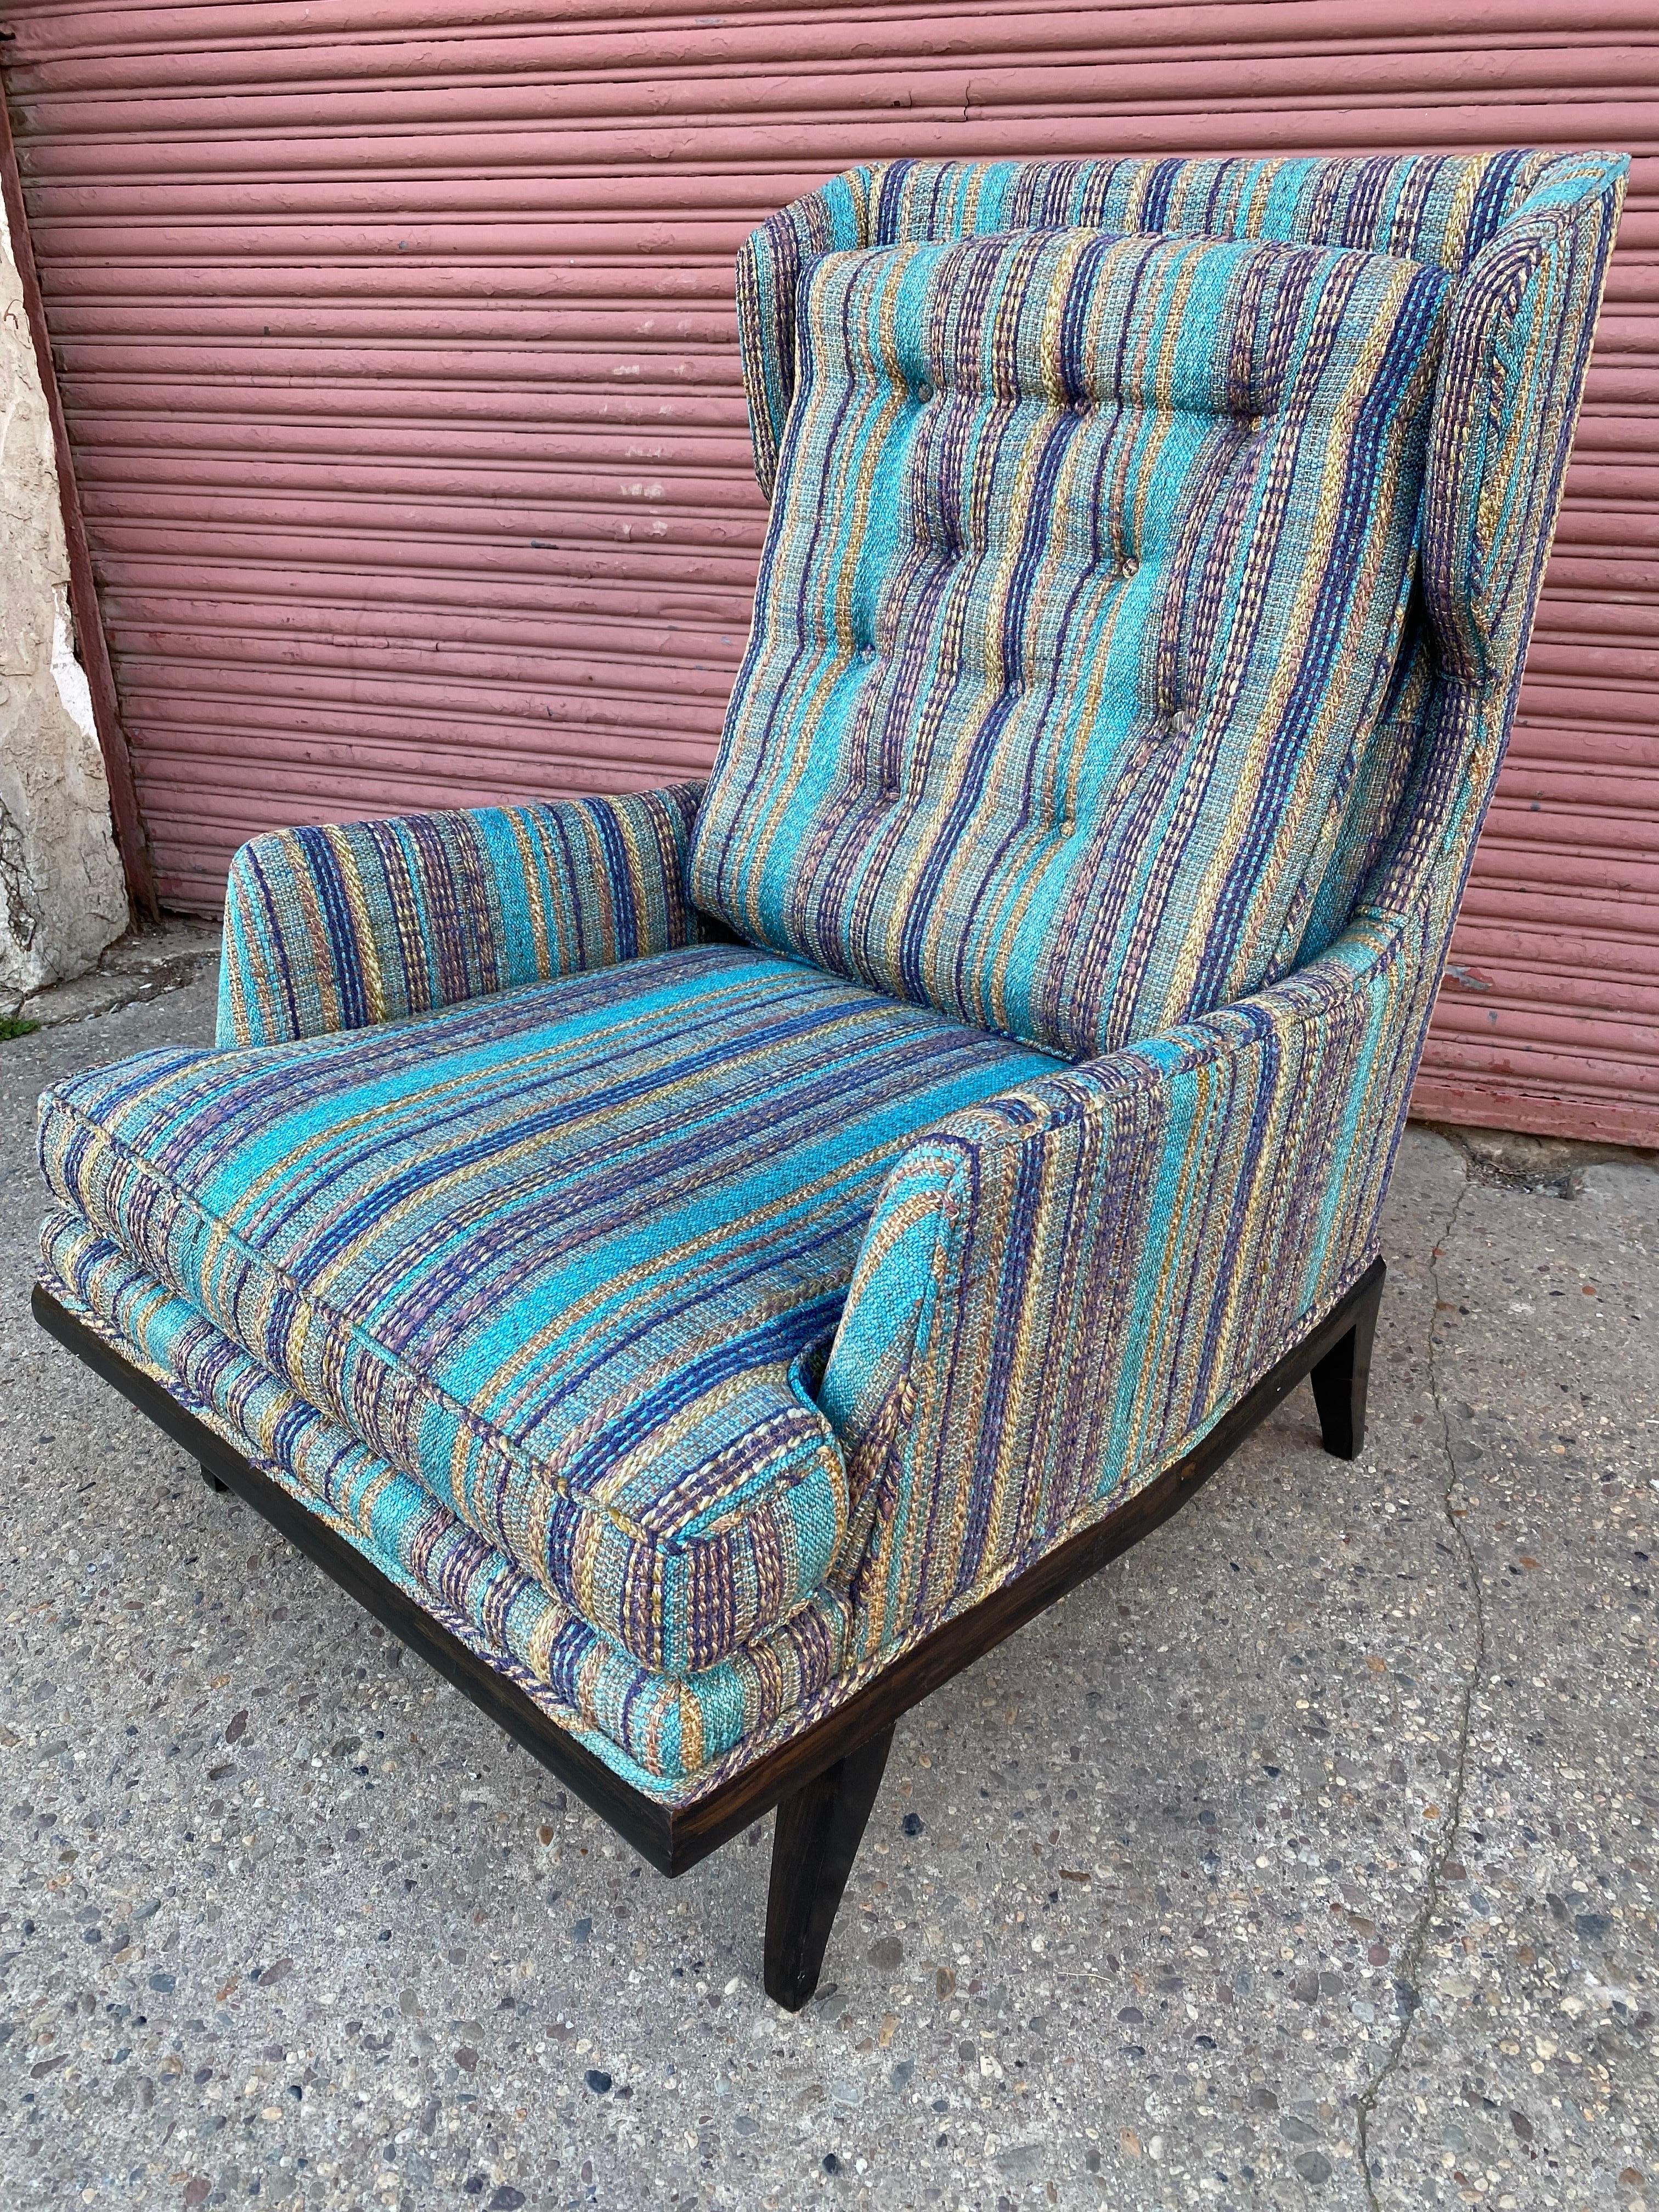 Upholstery Edward Wormley Style Lounge Chair with original Jack Lenor Larson Fabric